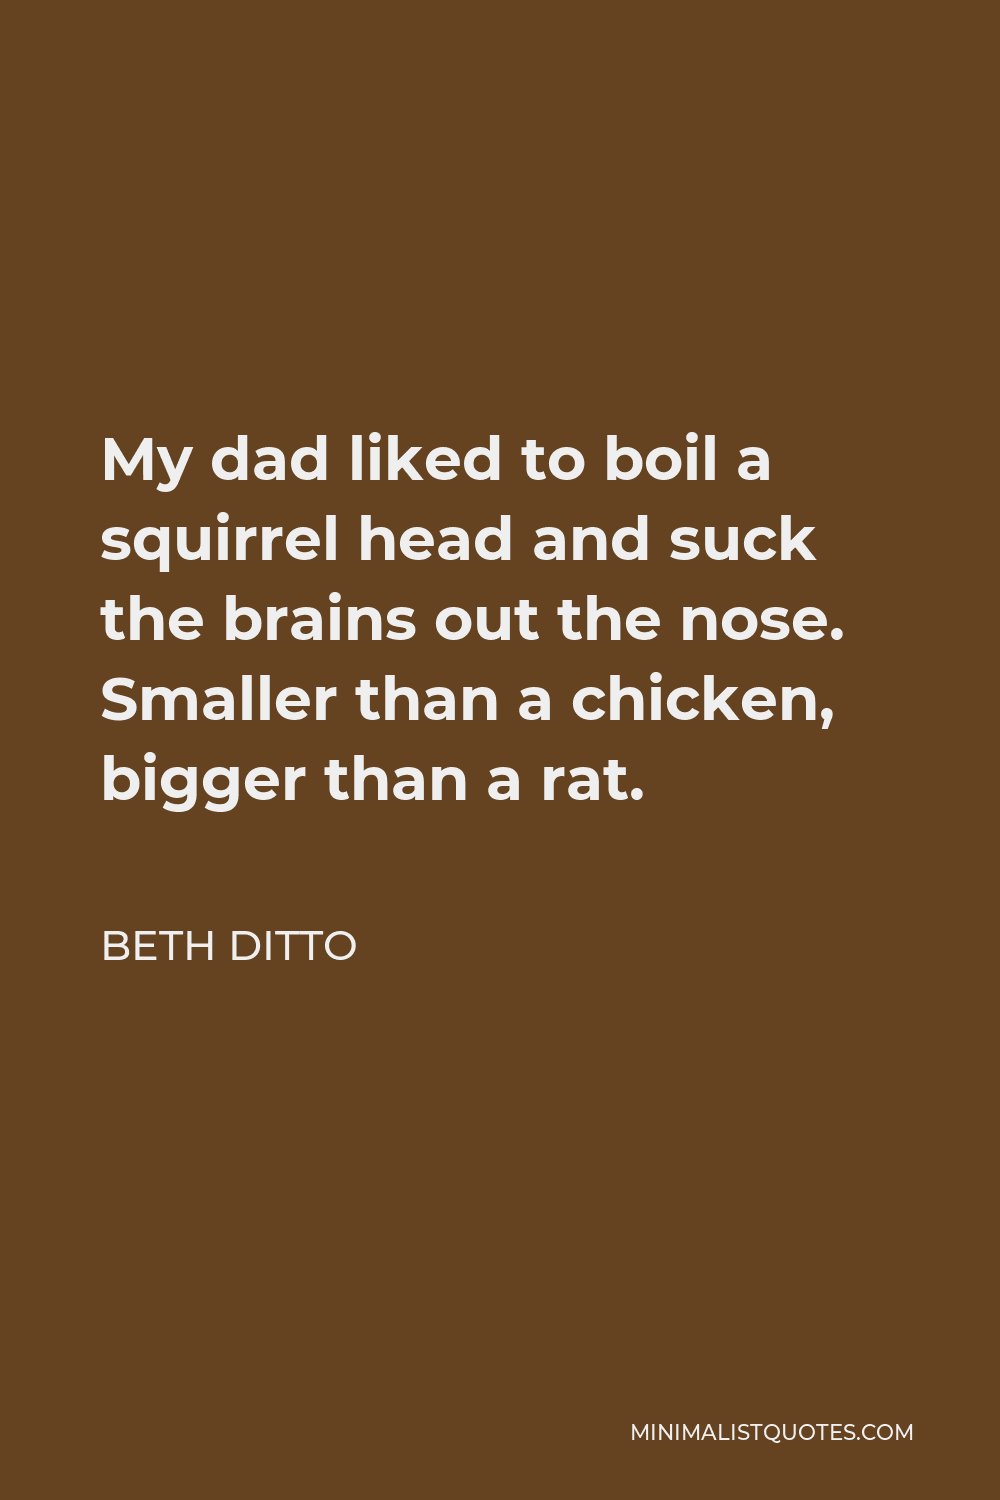 Beth Ditto Quote: My dad liked to boil a squirrel head and suck the brains  out the nose. Smaller than a chicken, bigger than a rat.